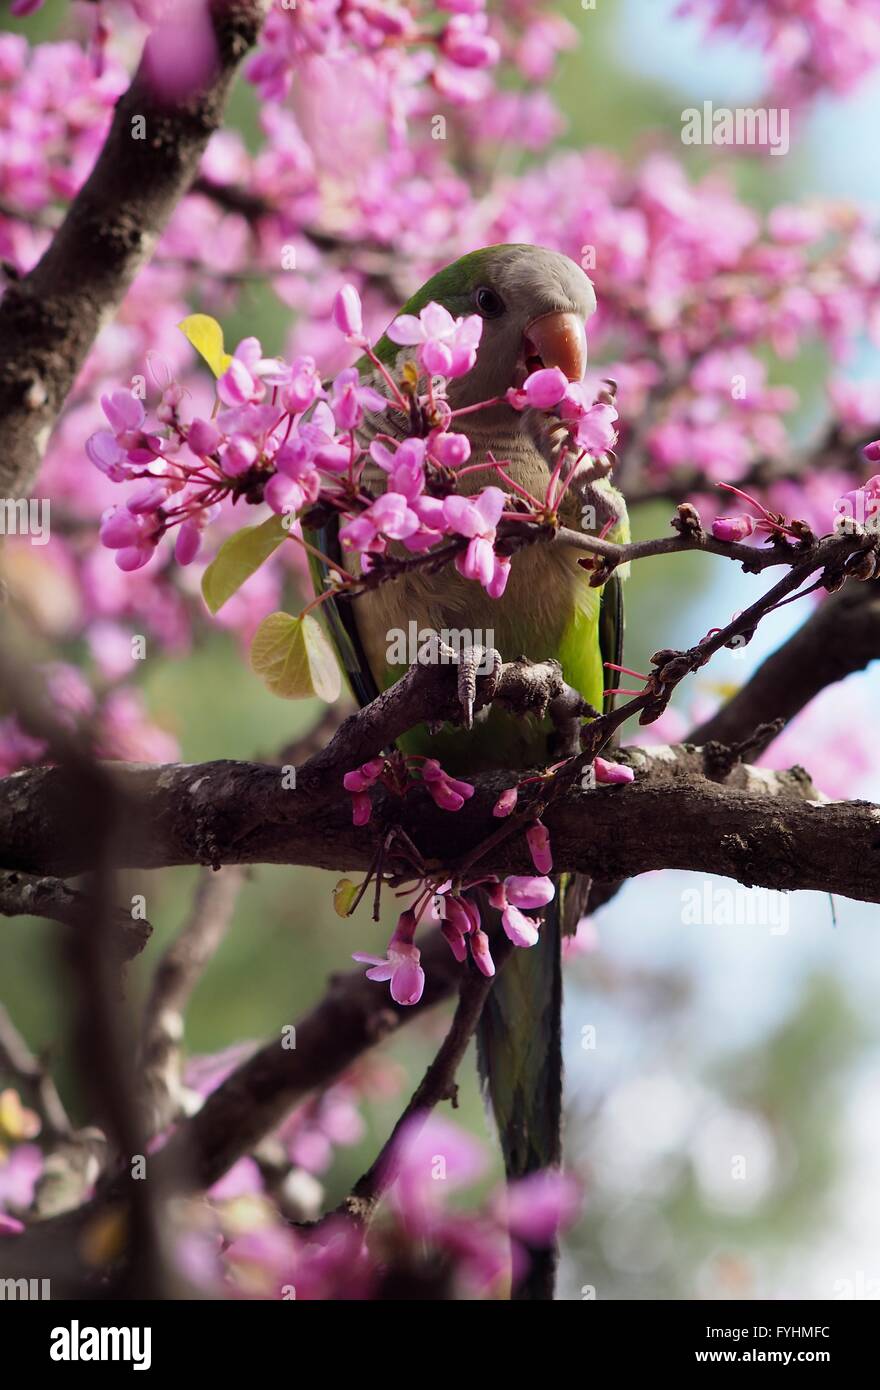 Green parrot eating cherry blossom flowers in Park Guell, Barcelona, designed by Antonio Gaudi Stock Photo